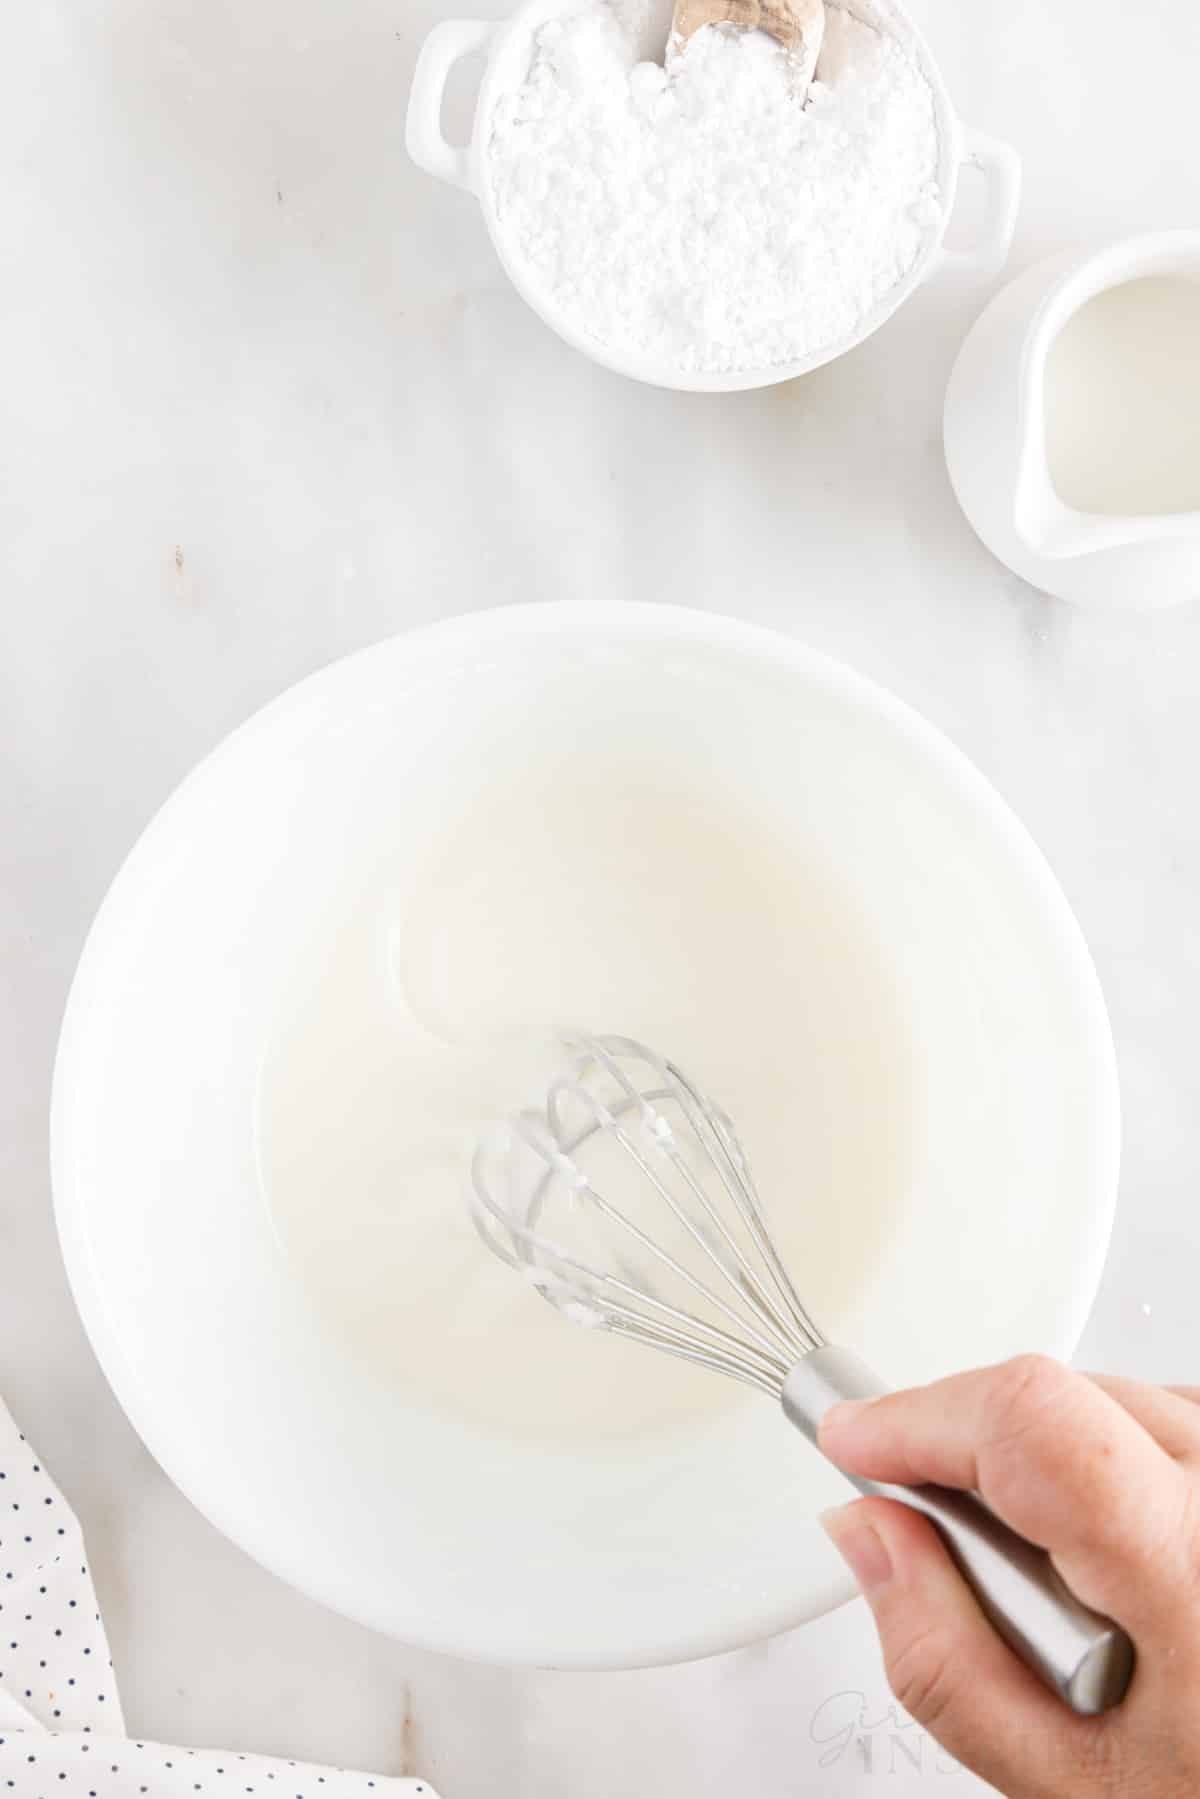 Glaze in a mixing bowl with a whisk.